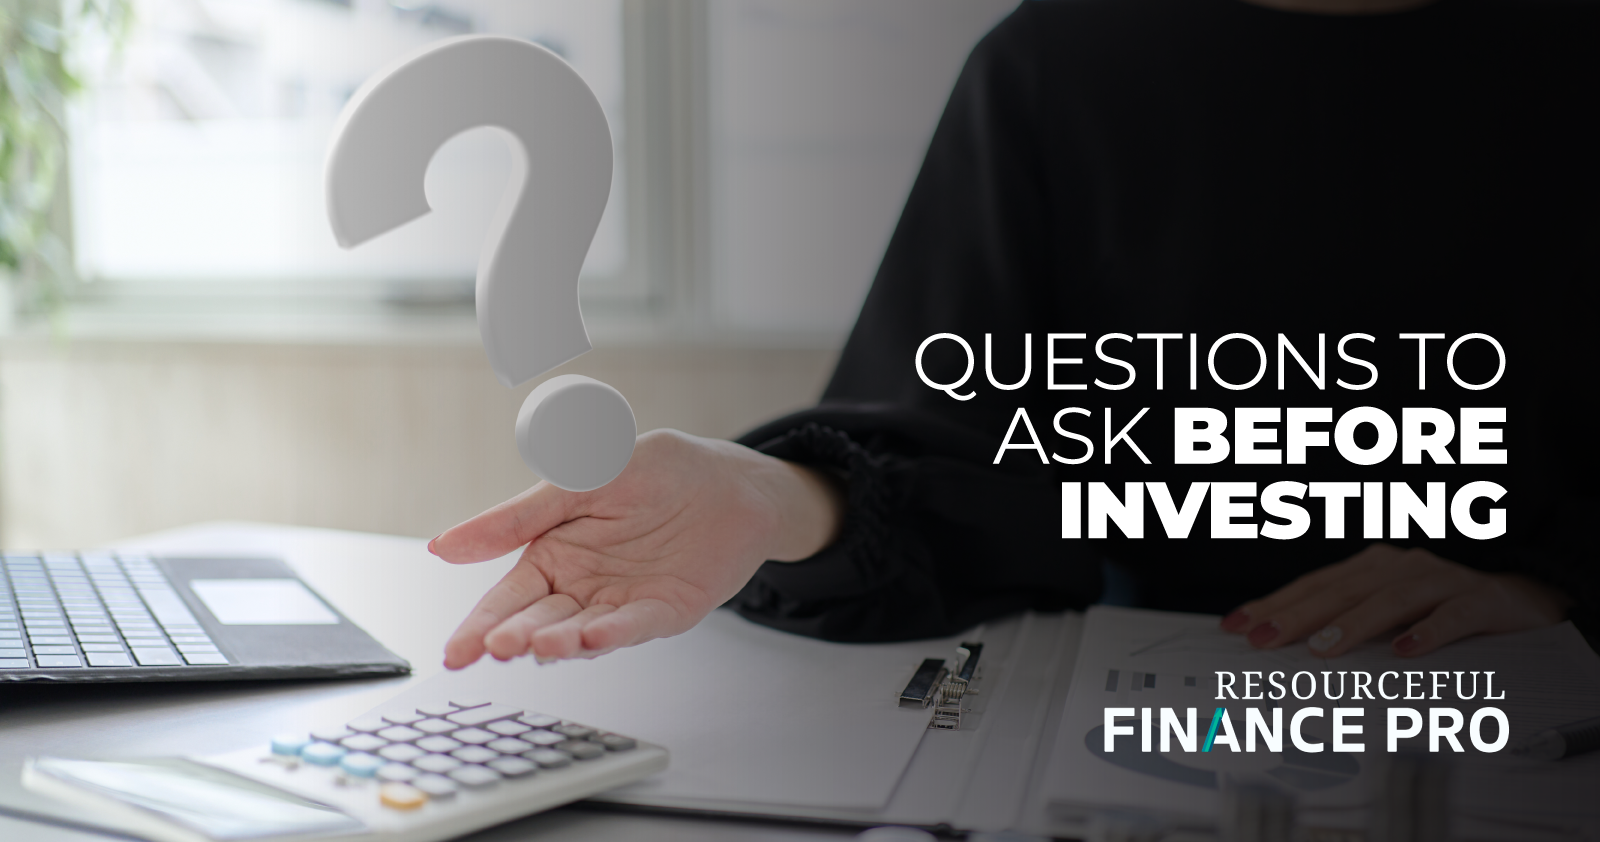 Questions to ask before investing